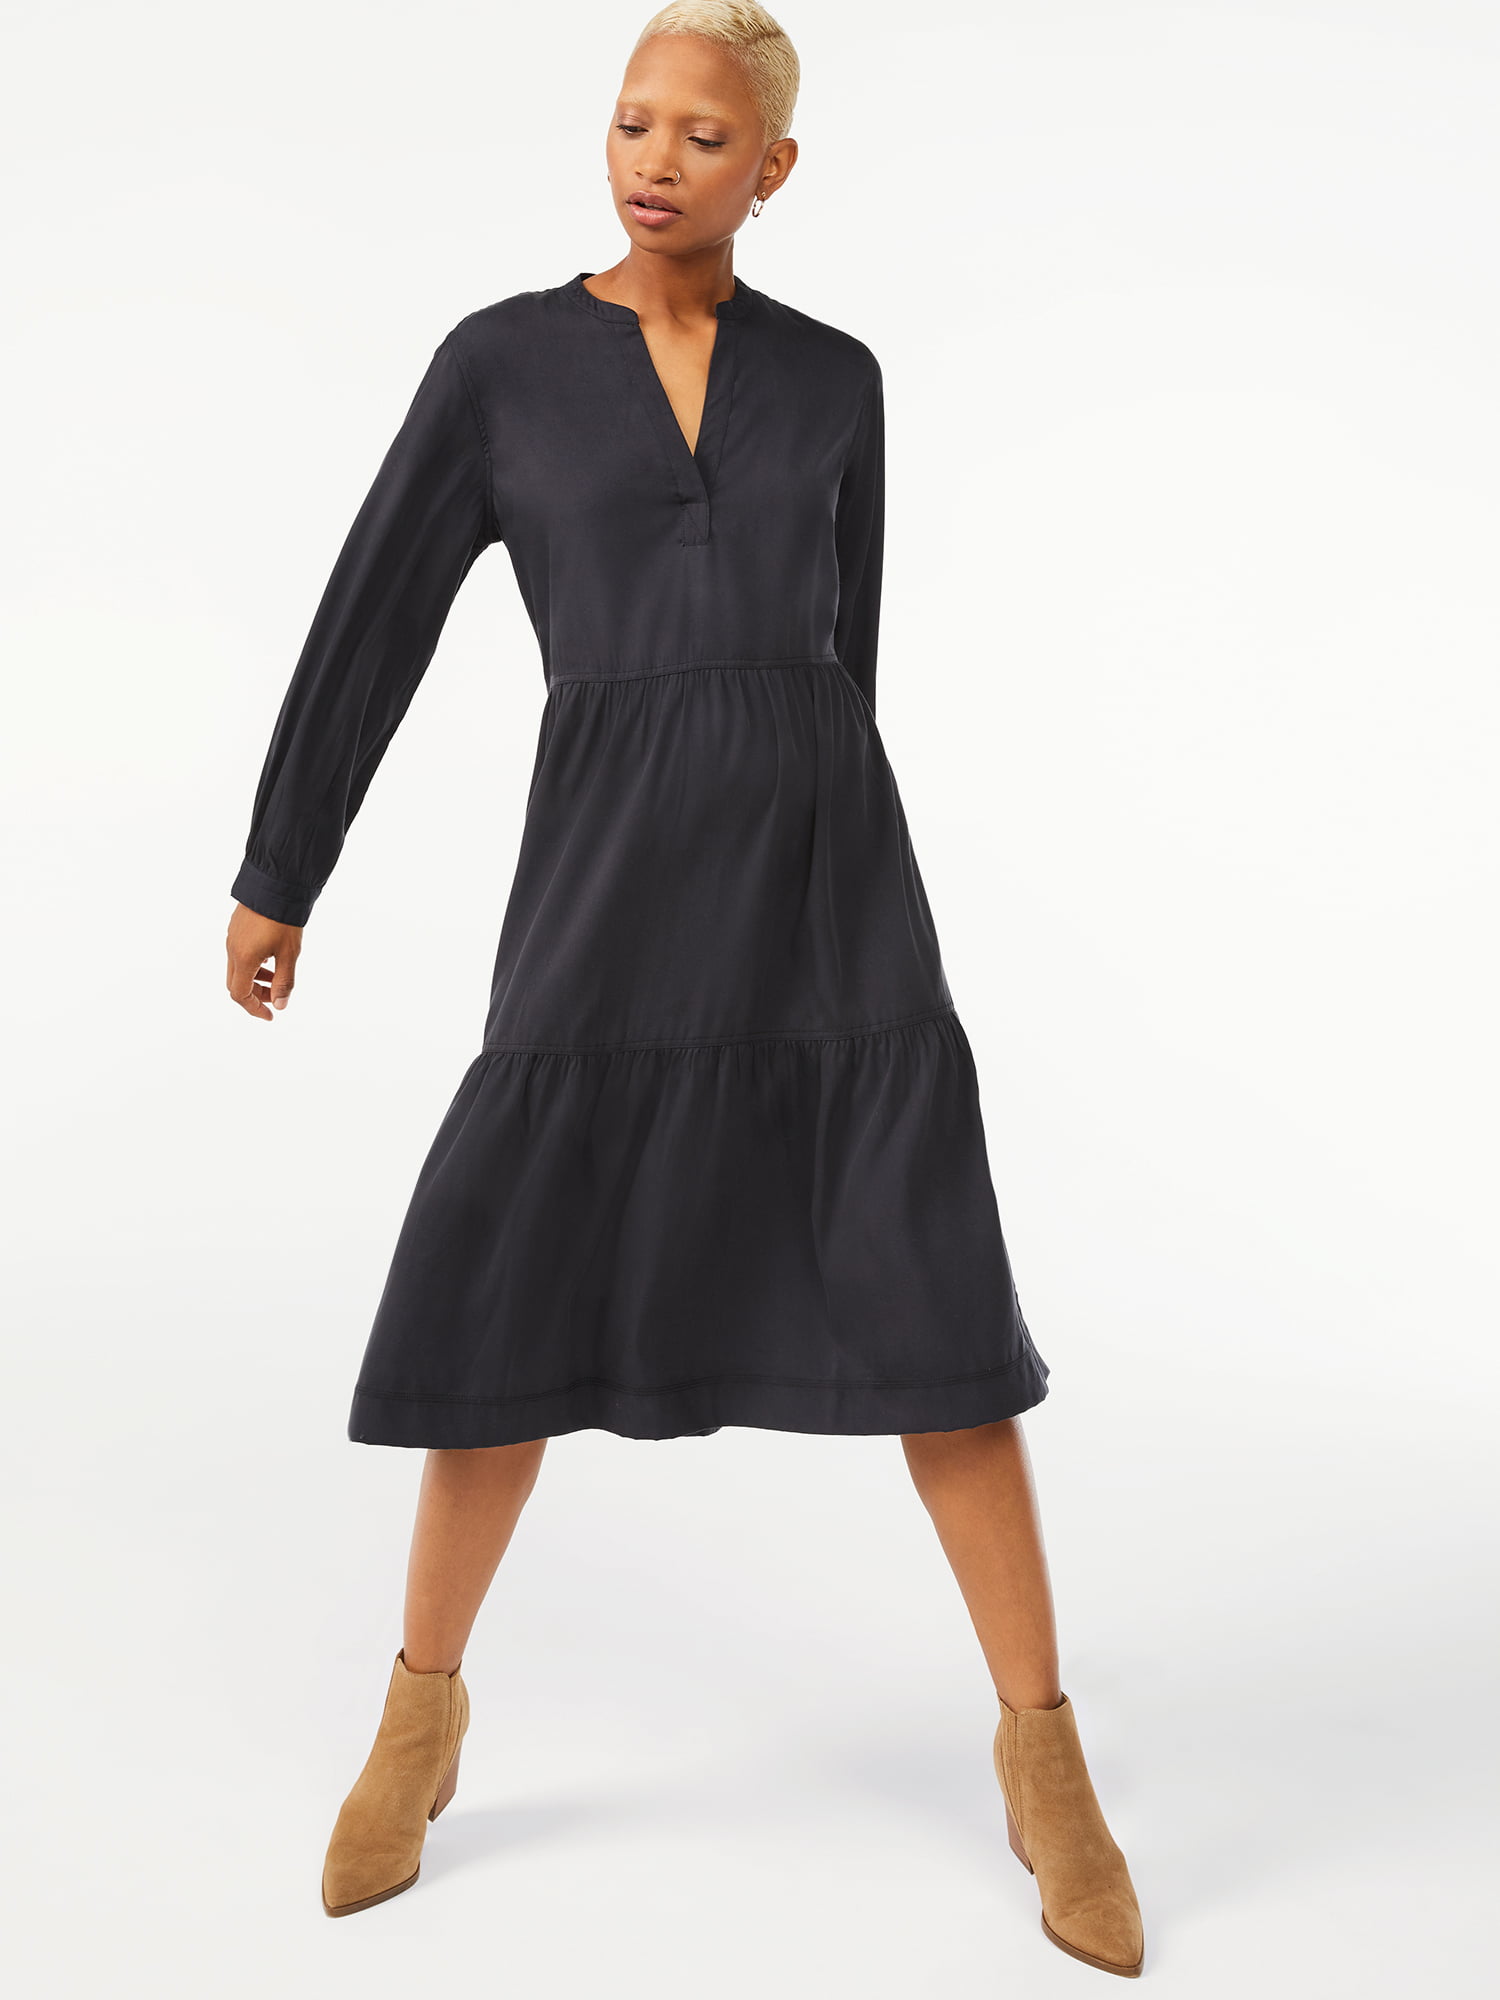 Free Assembly Women's Swing Shirtdress with Long Sleeves - Walmart.com